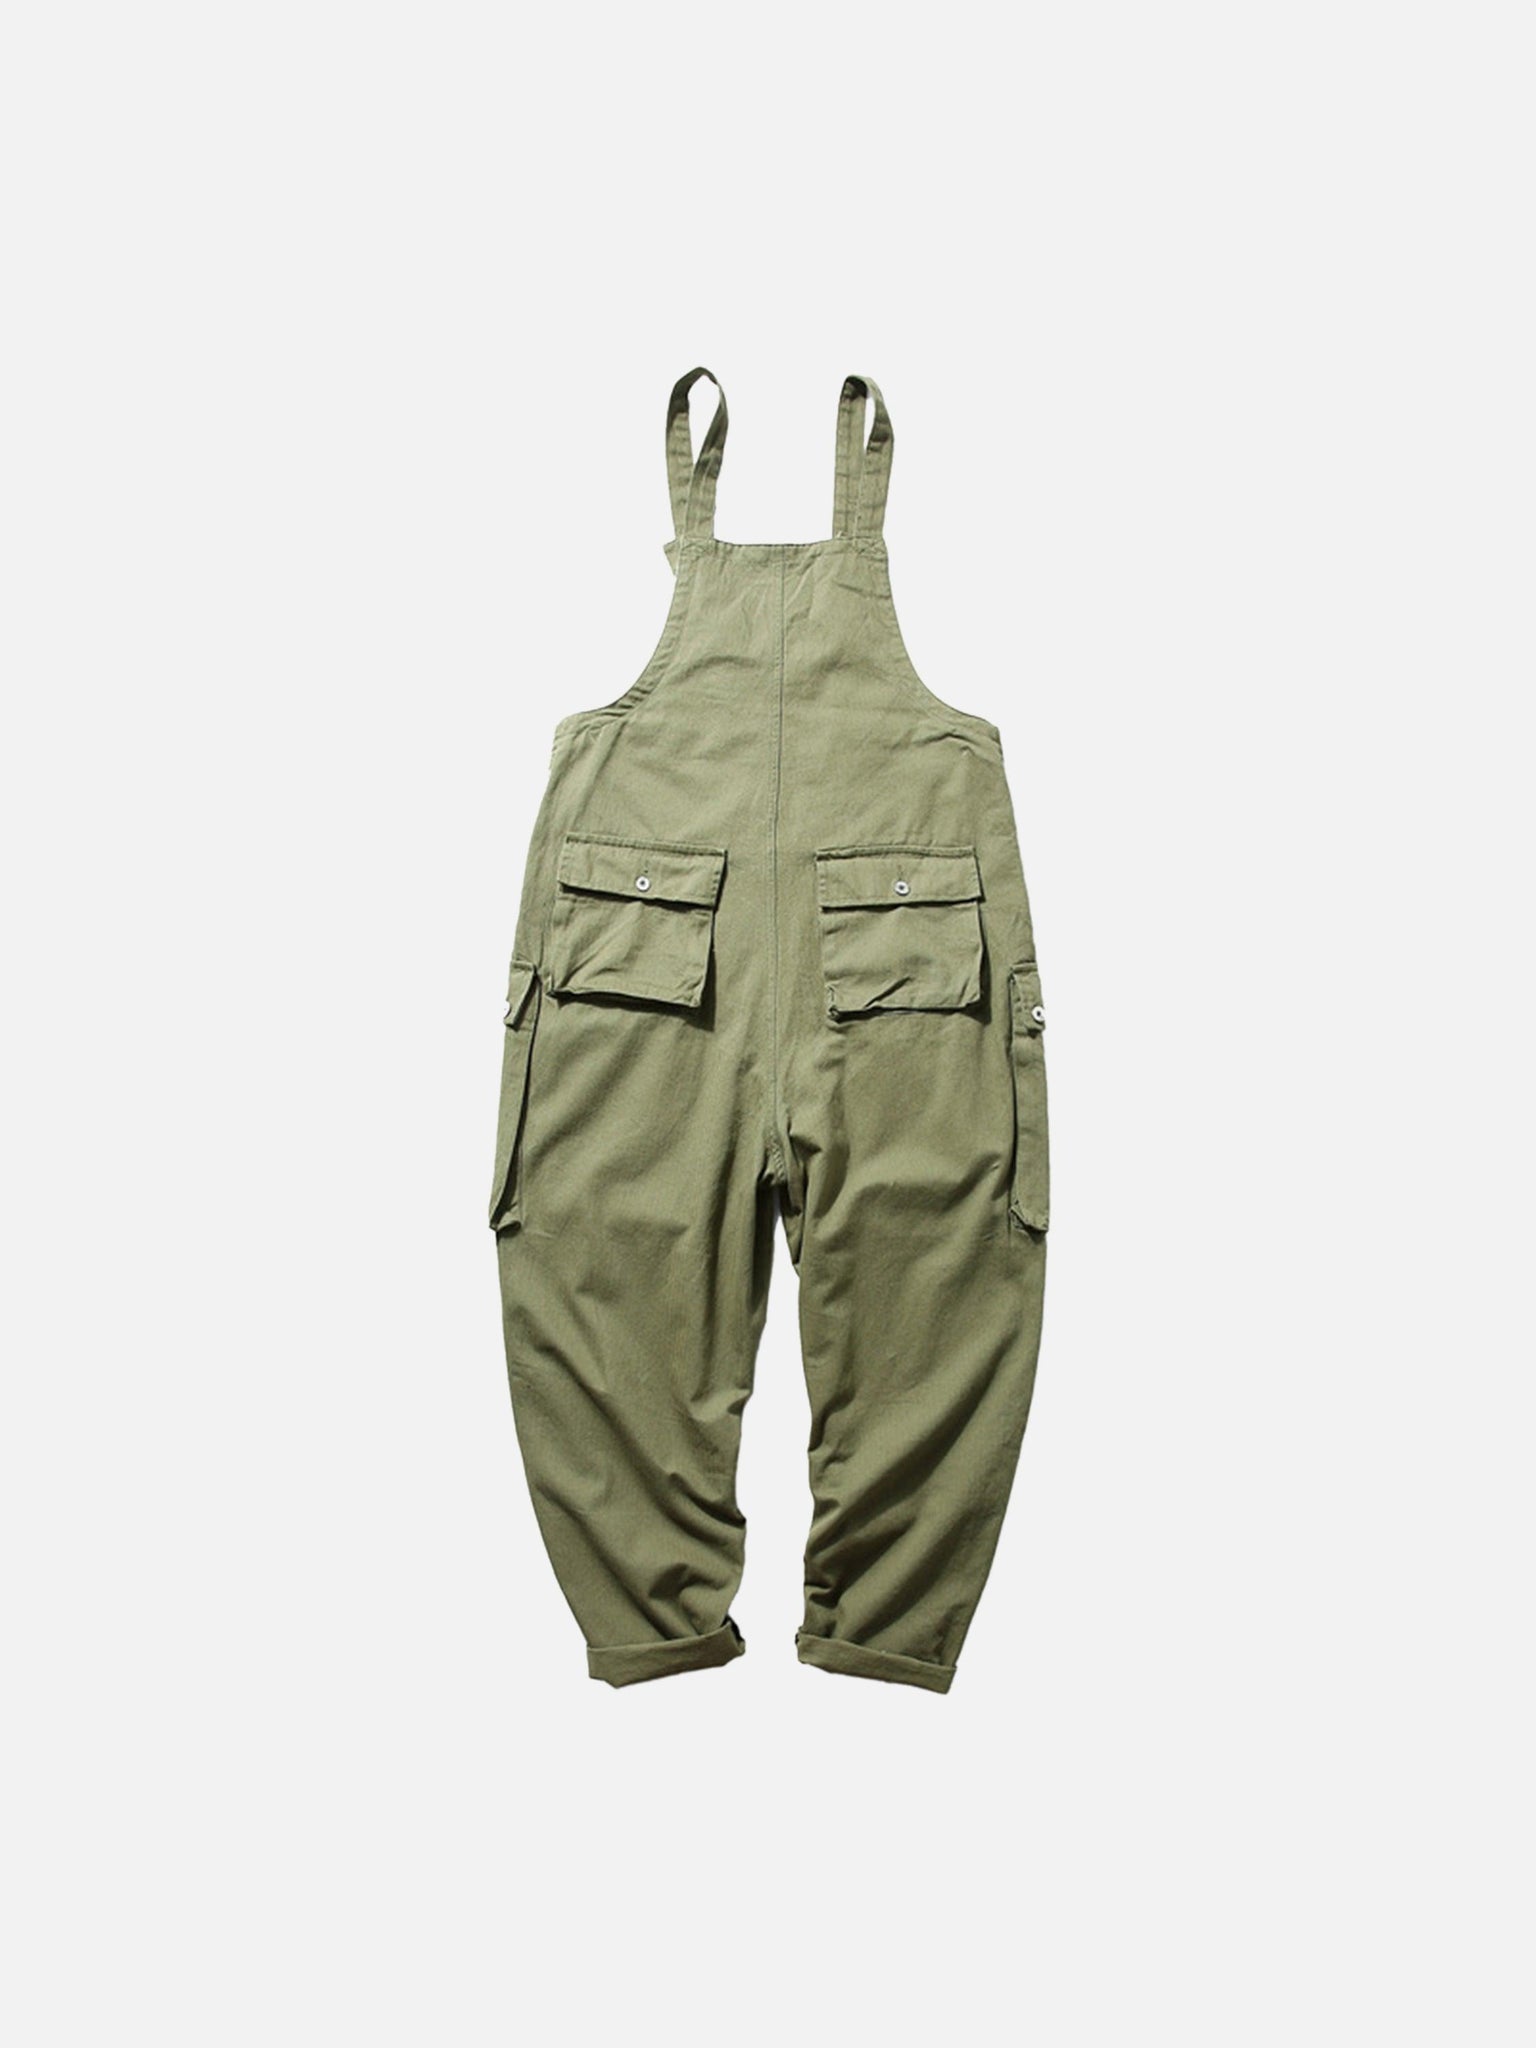 The Supermade Cargo Overall Pants